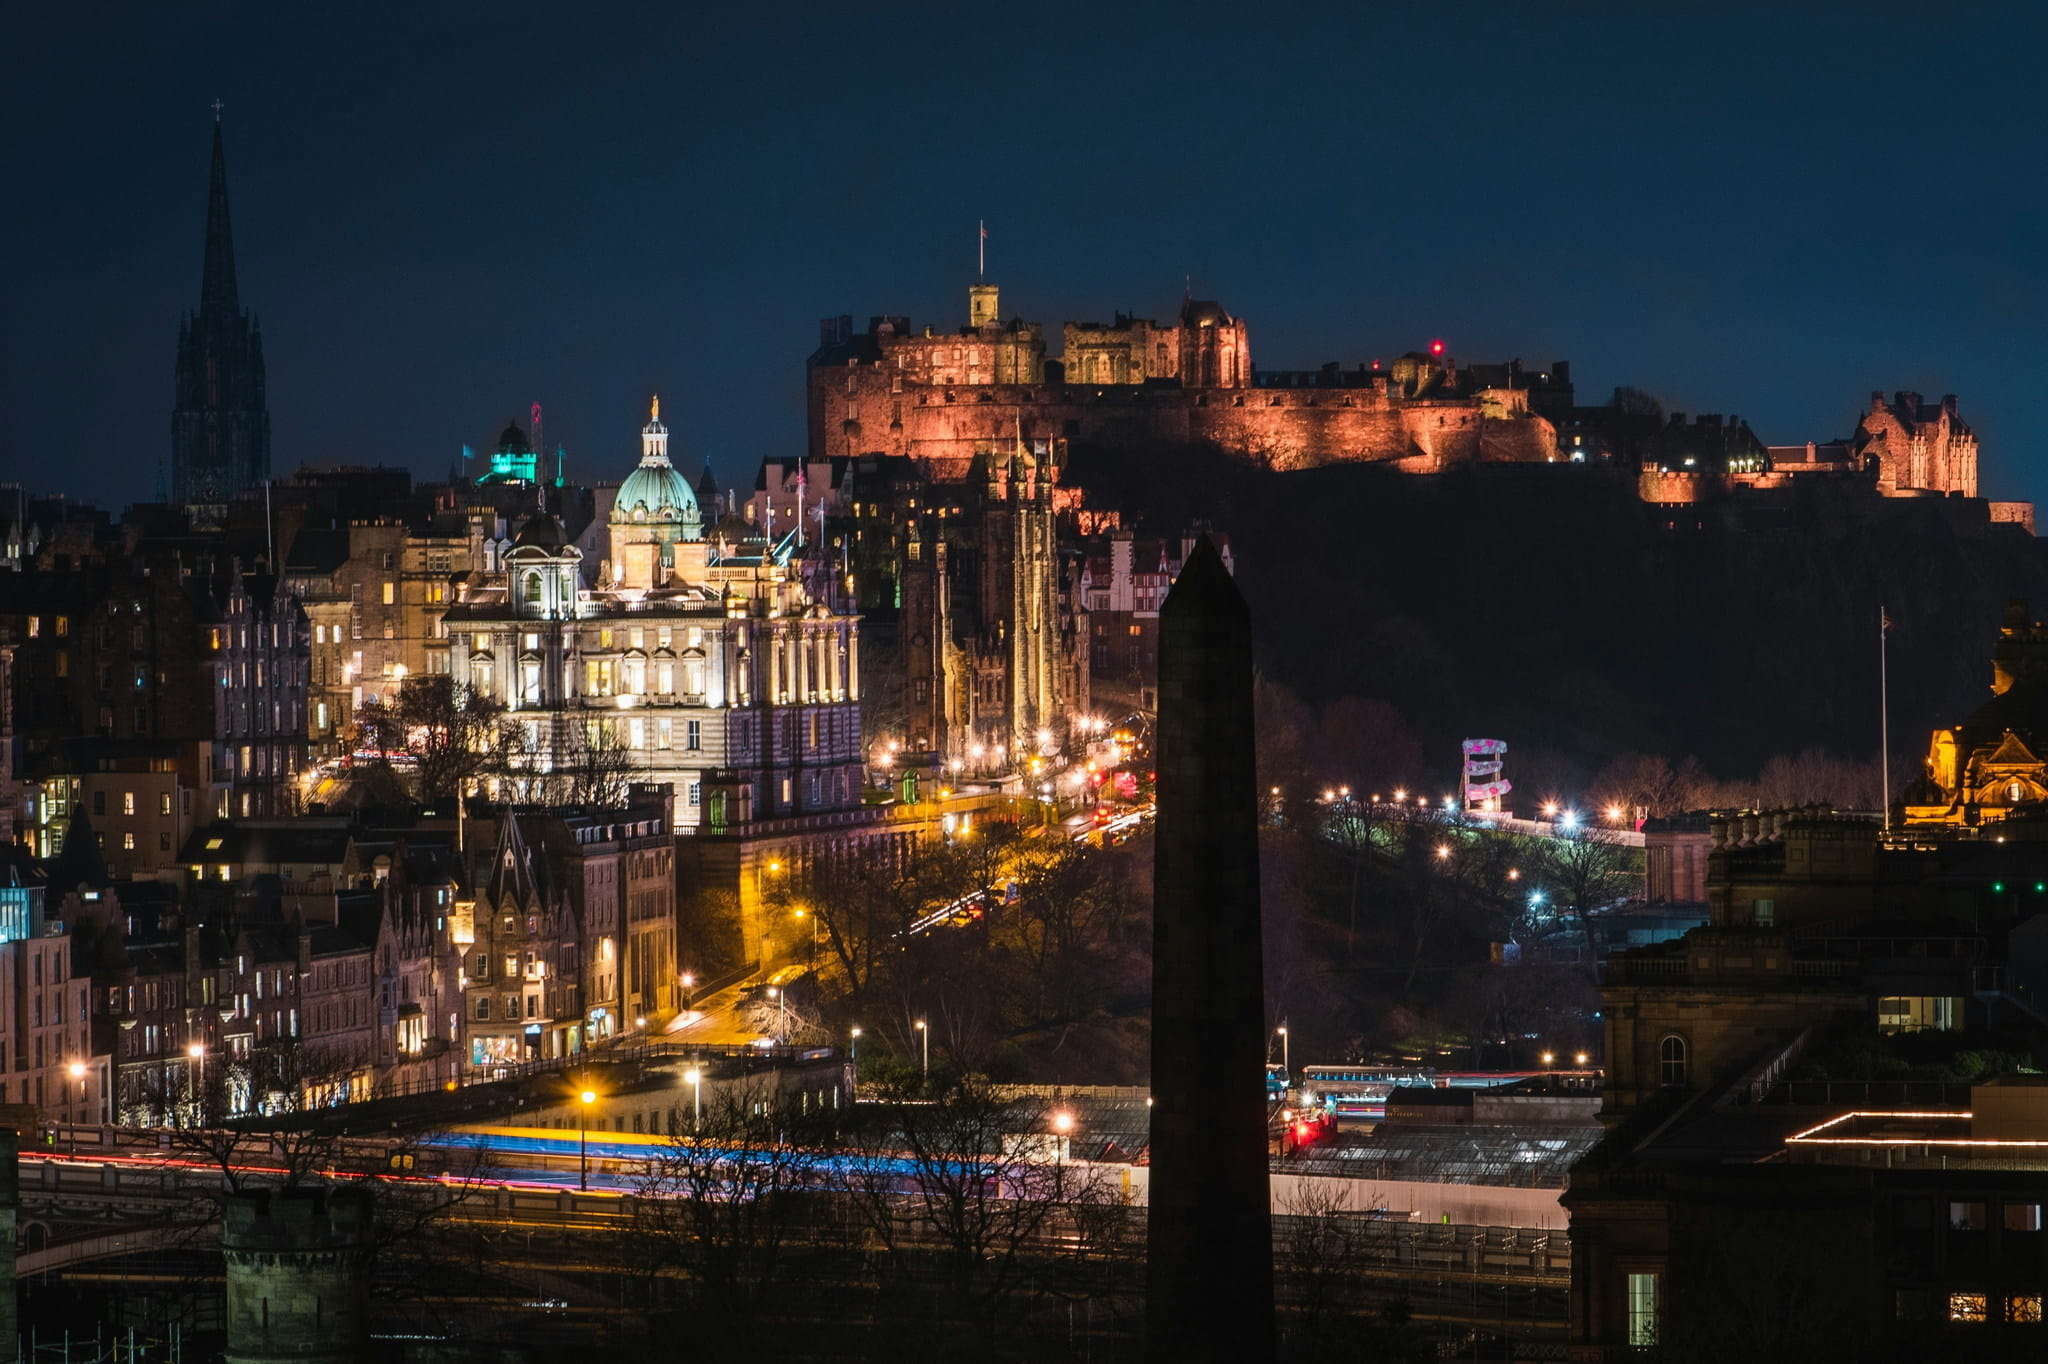 Edinburgh castle and building at night time.